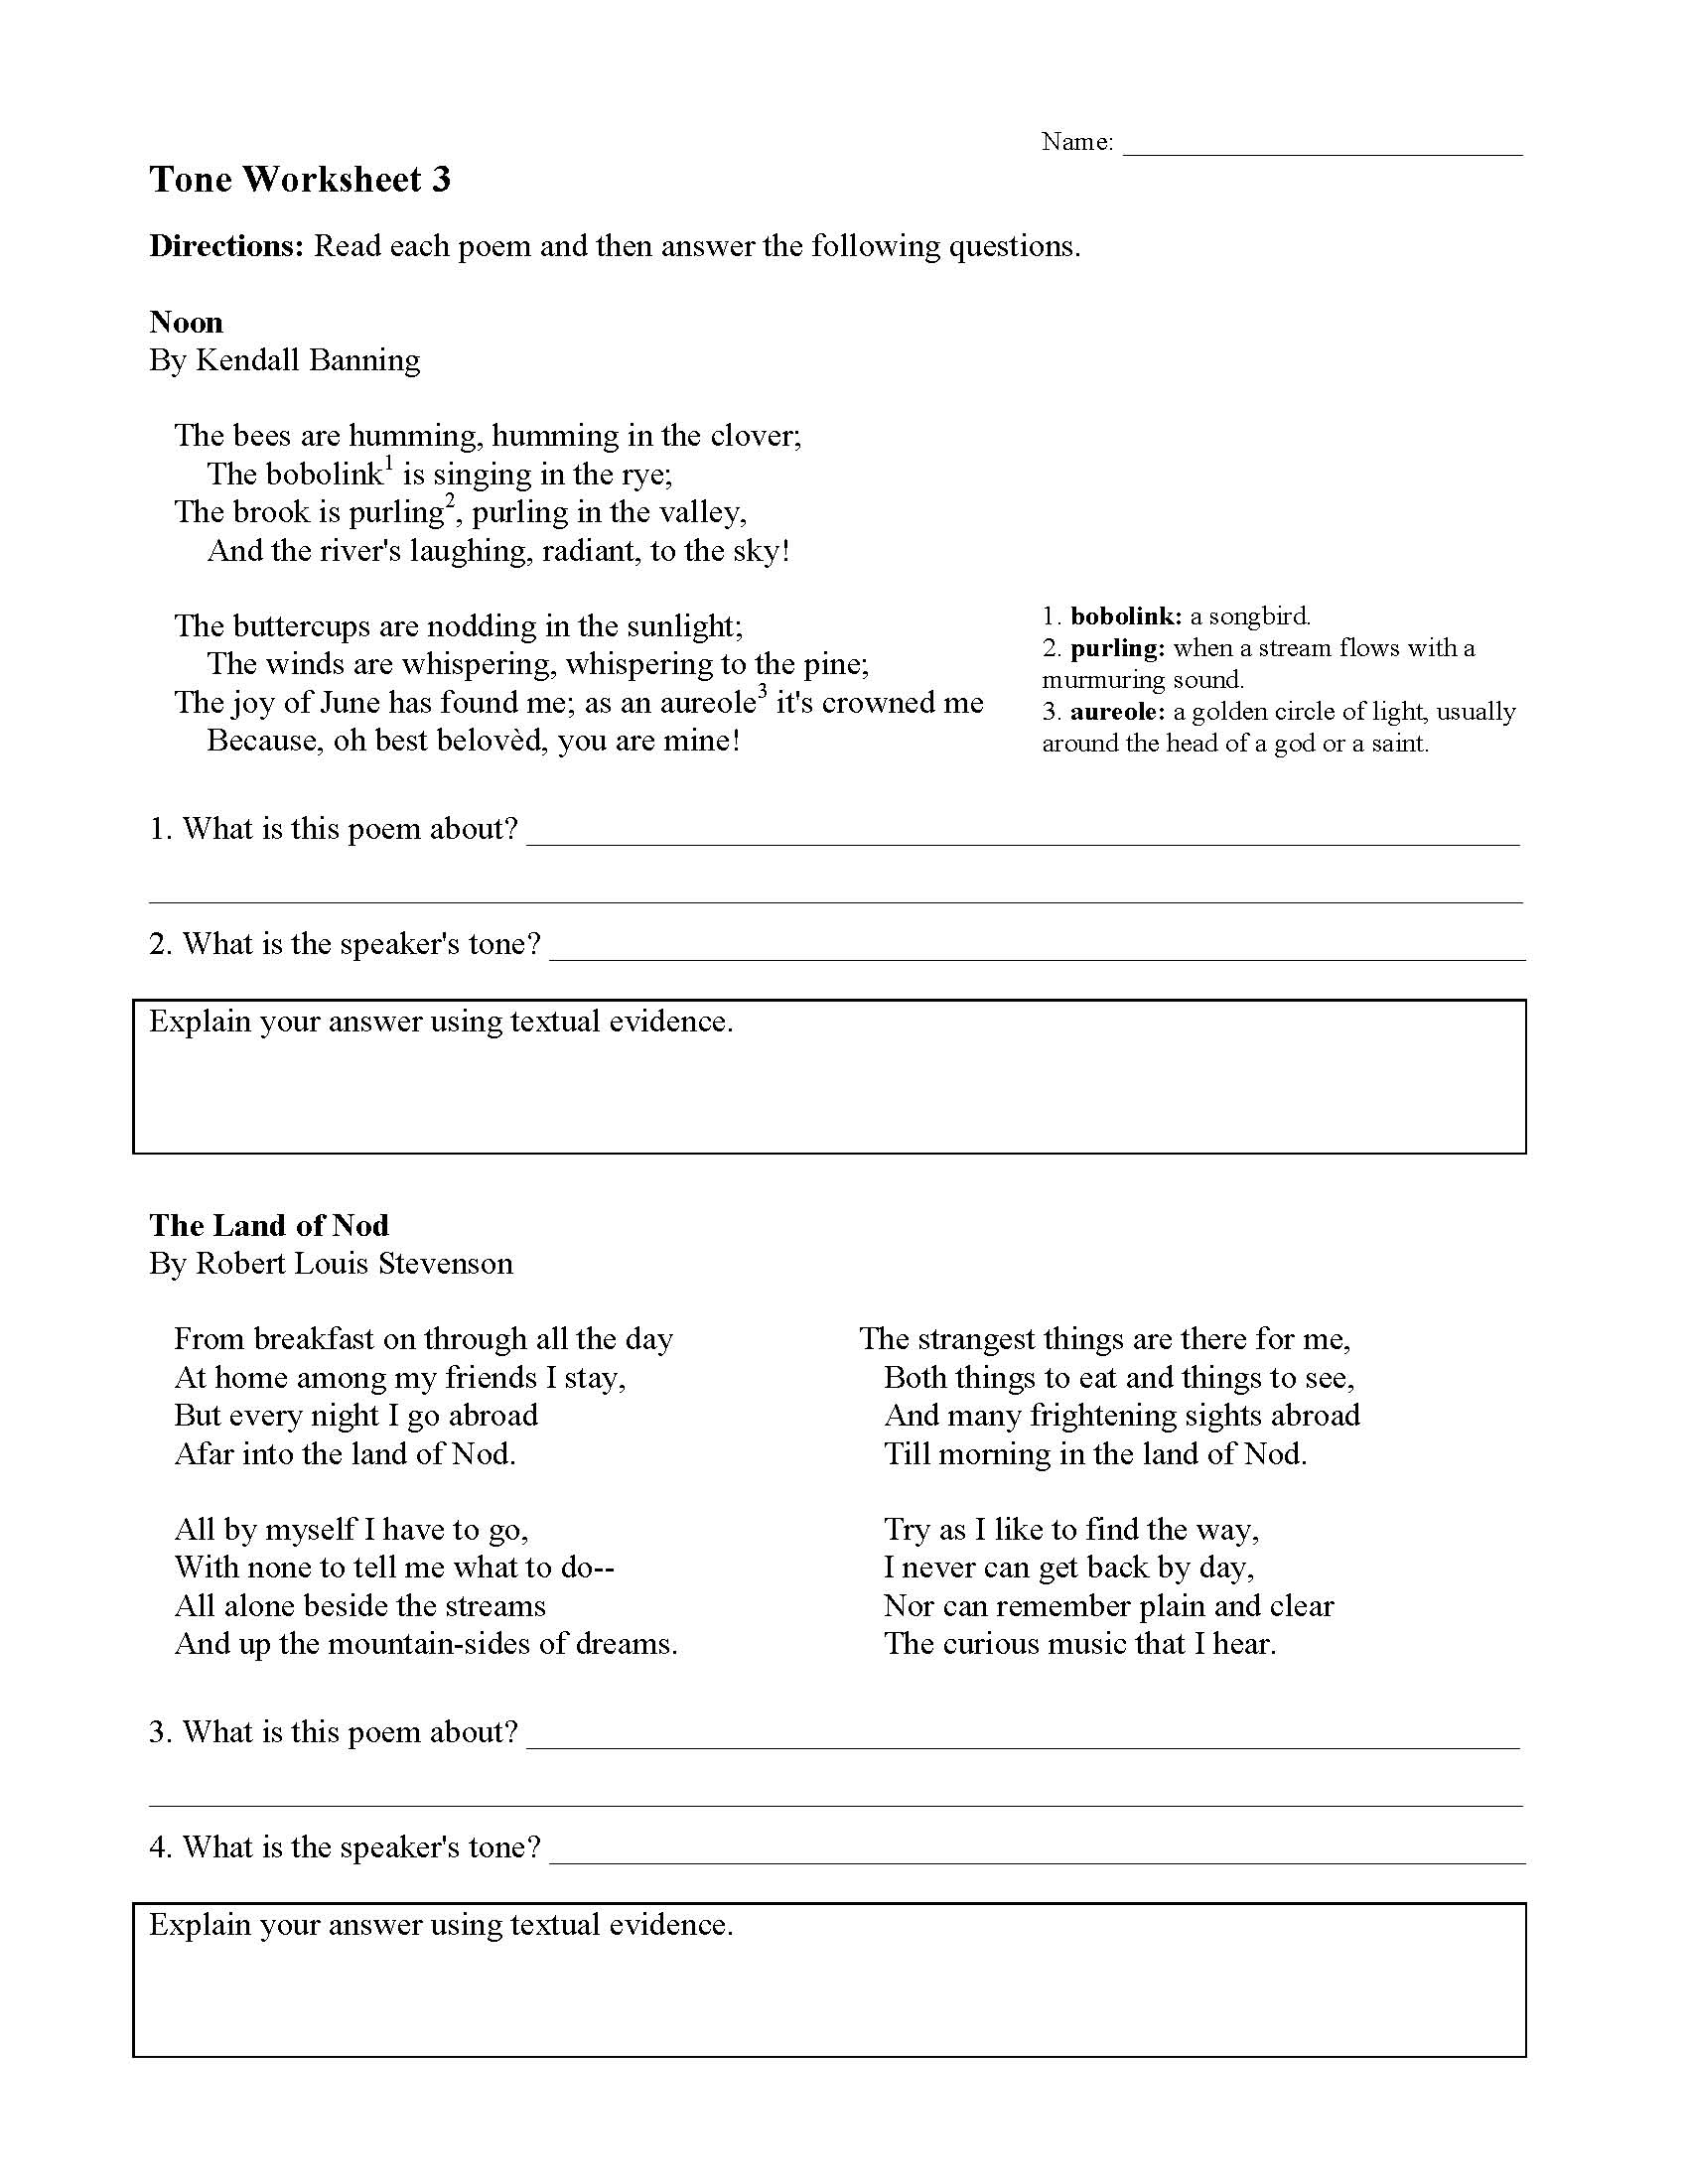 This is a preview image of Tone Worksheet 3. Click on it to enlarge it or view the source file.